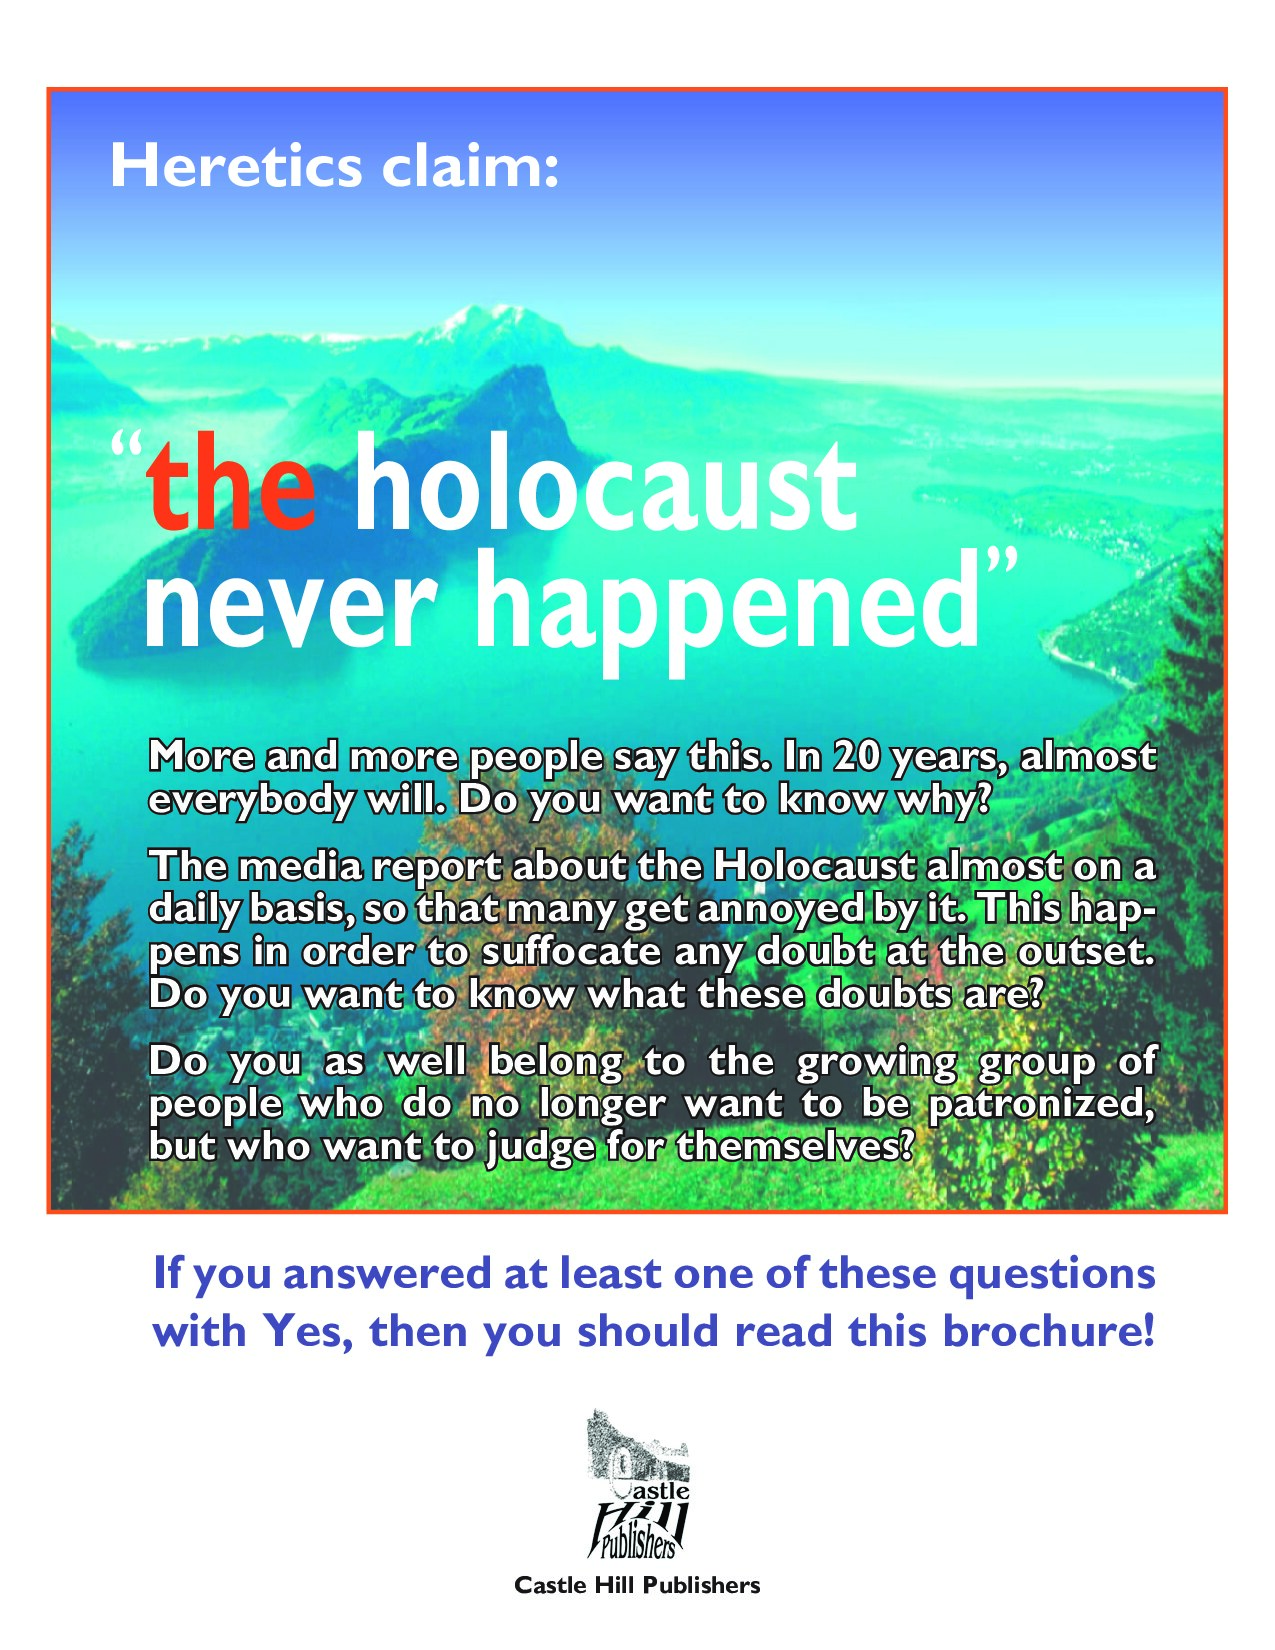 The Holocaust Controversy - A Case For Open Debate